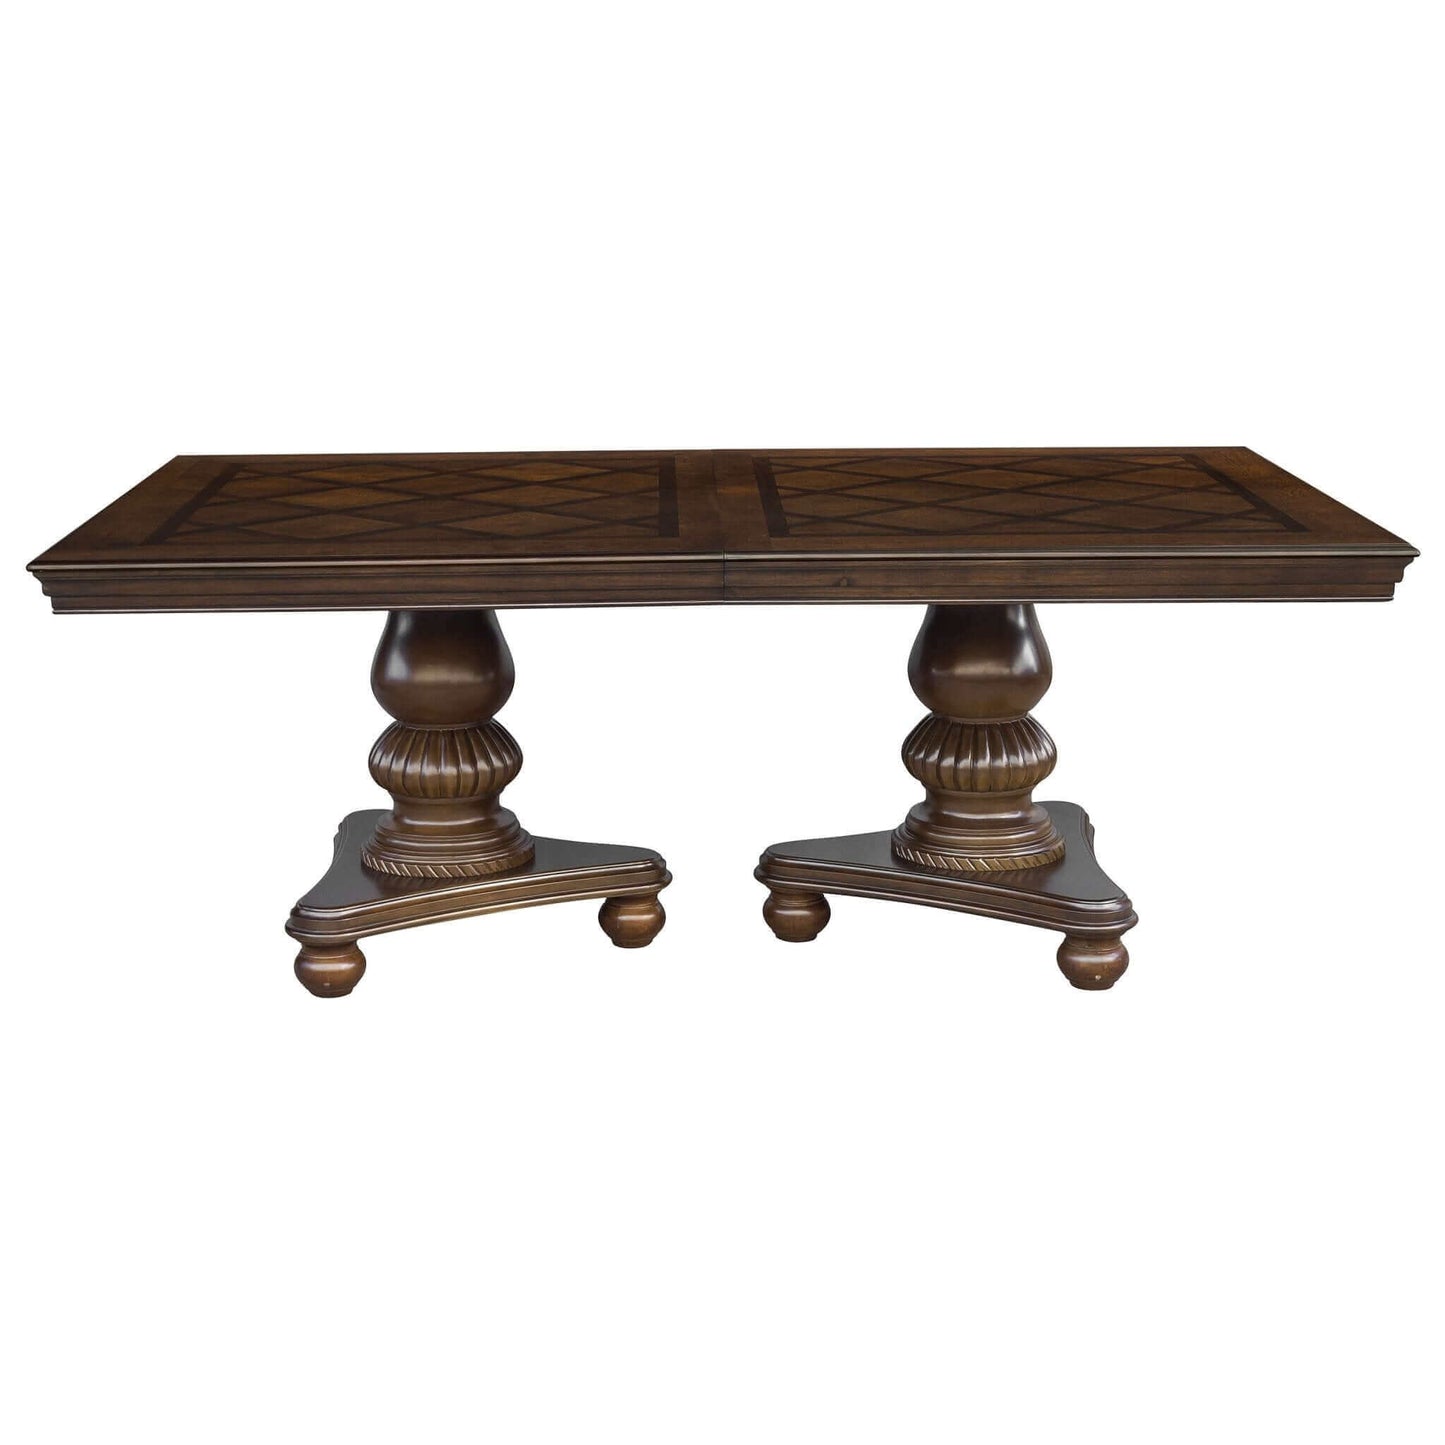 Traditional style dining table with elegant brown cherry finish and intricate pedestal legs.